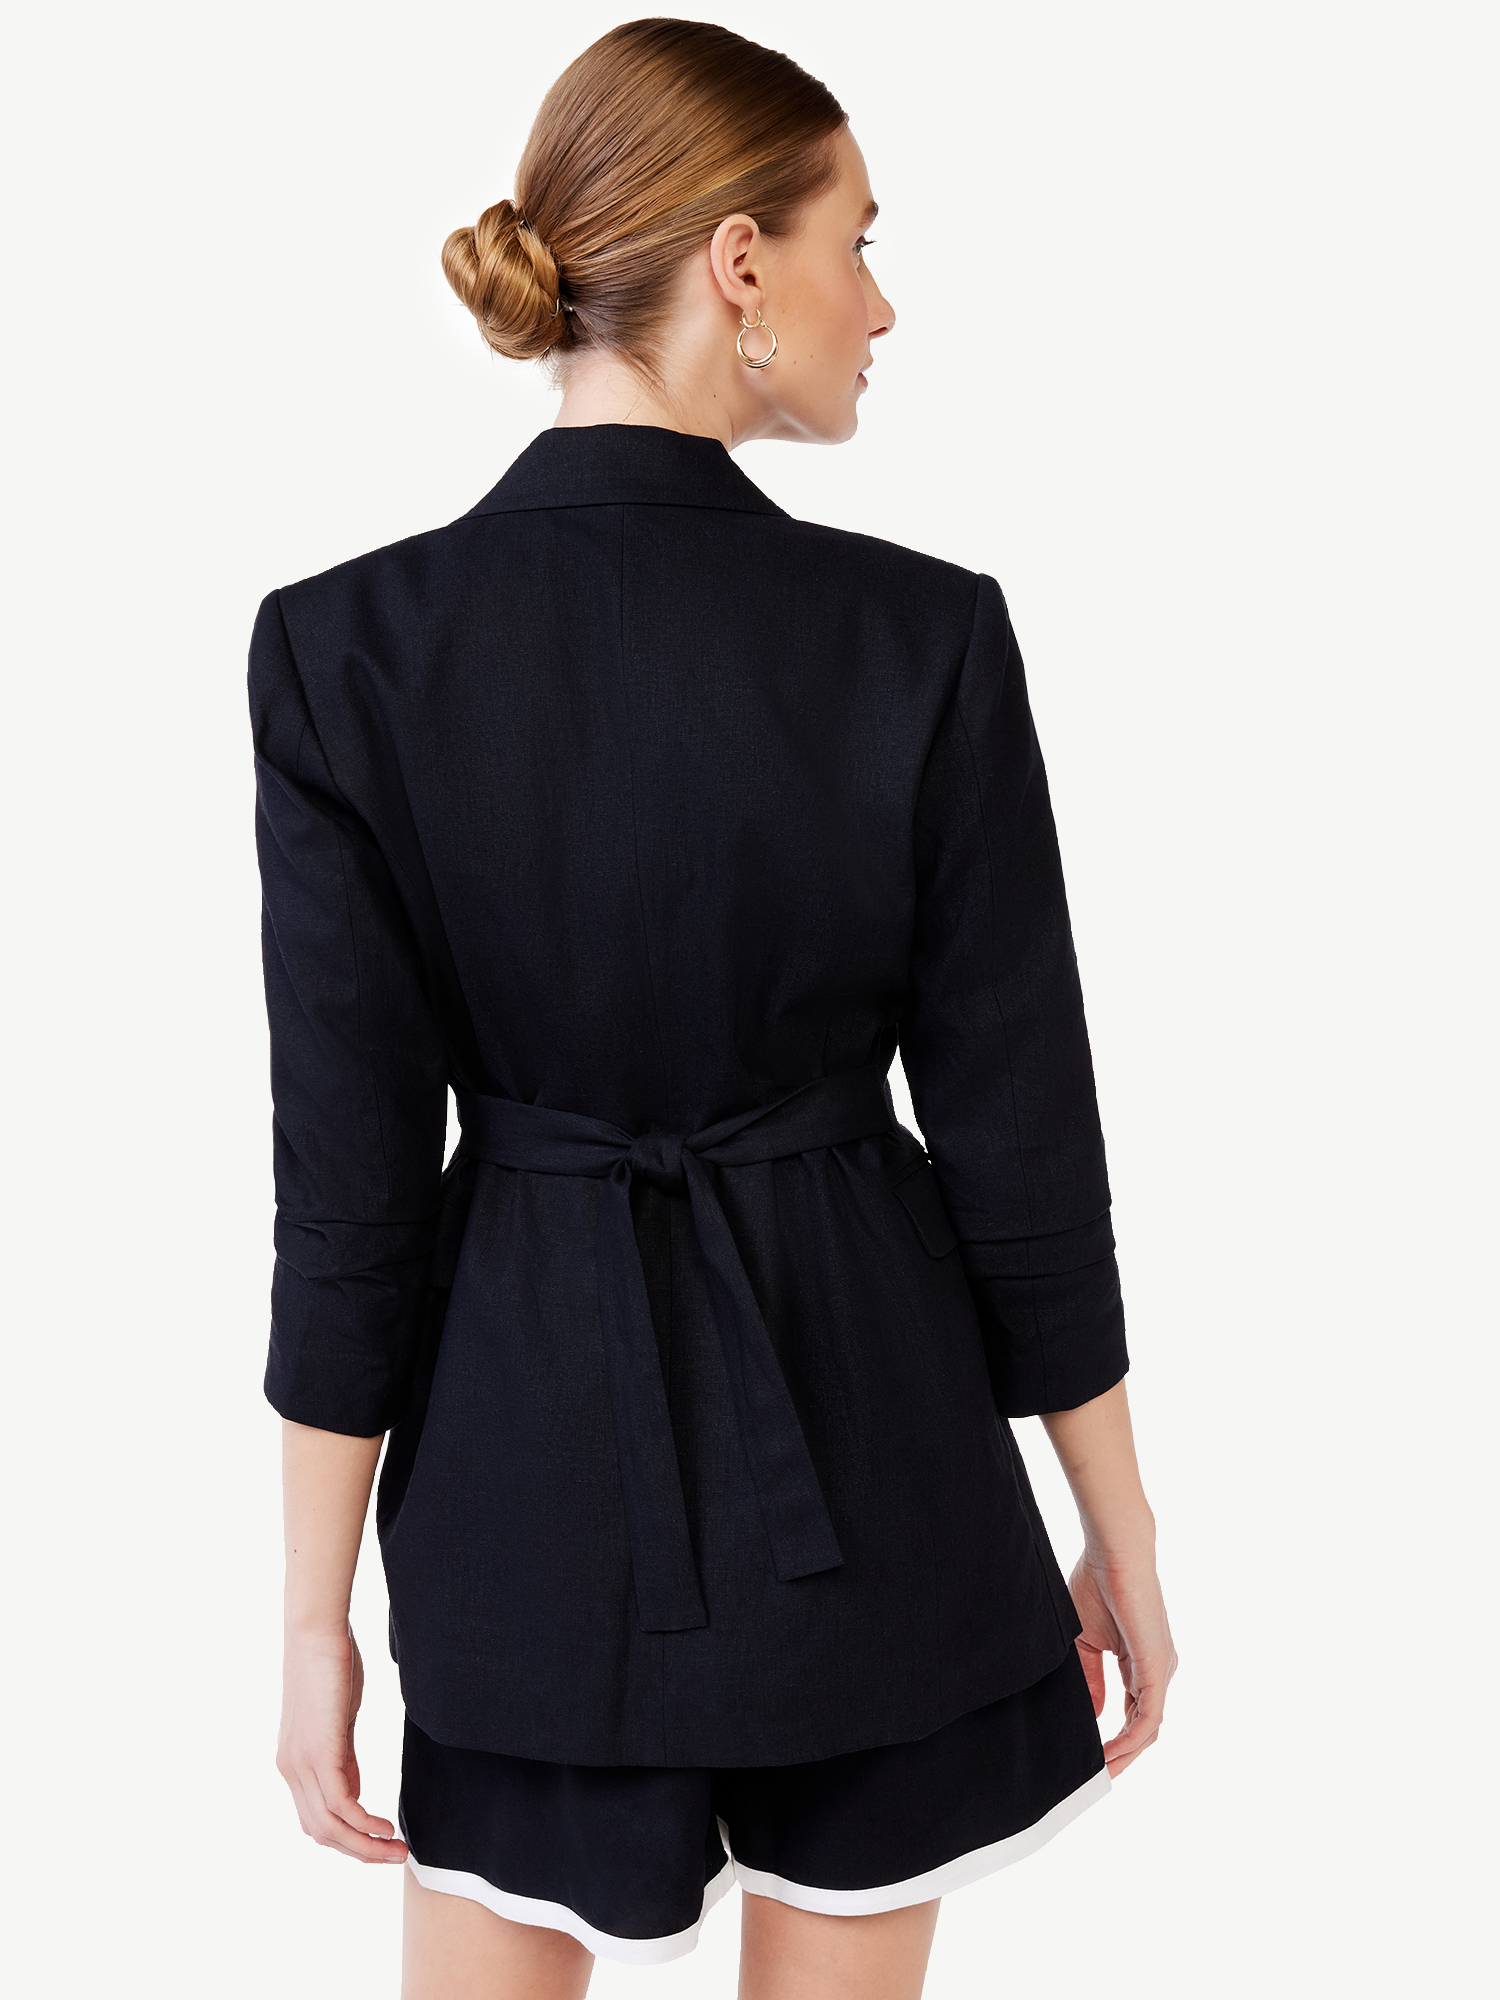 Scoop Women's Linen-Blend Open Front Blazer with Tie Back and 3/4 Scrunch Sleeves - image 4 of 5